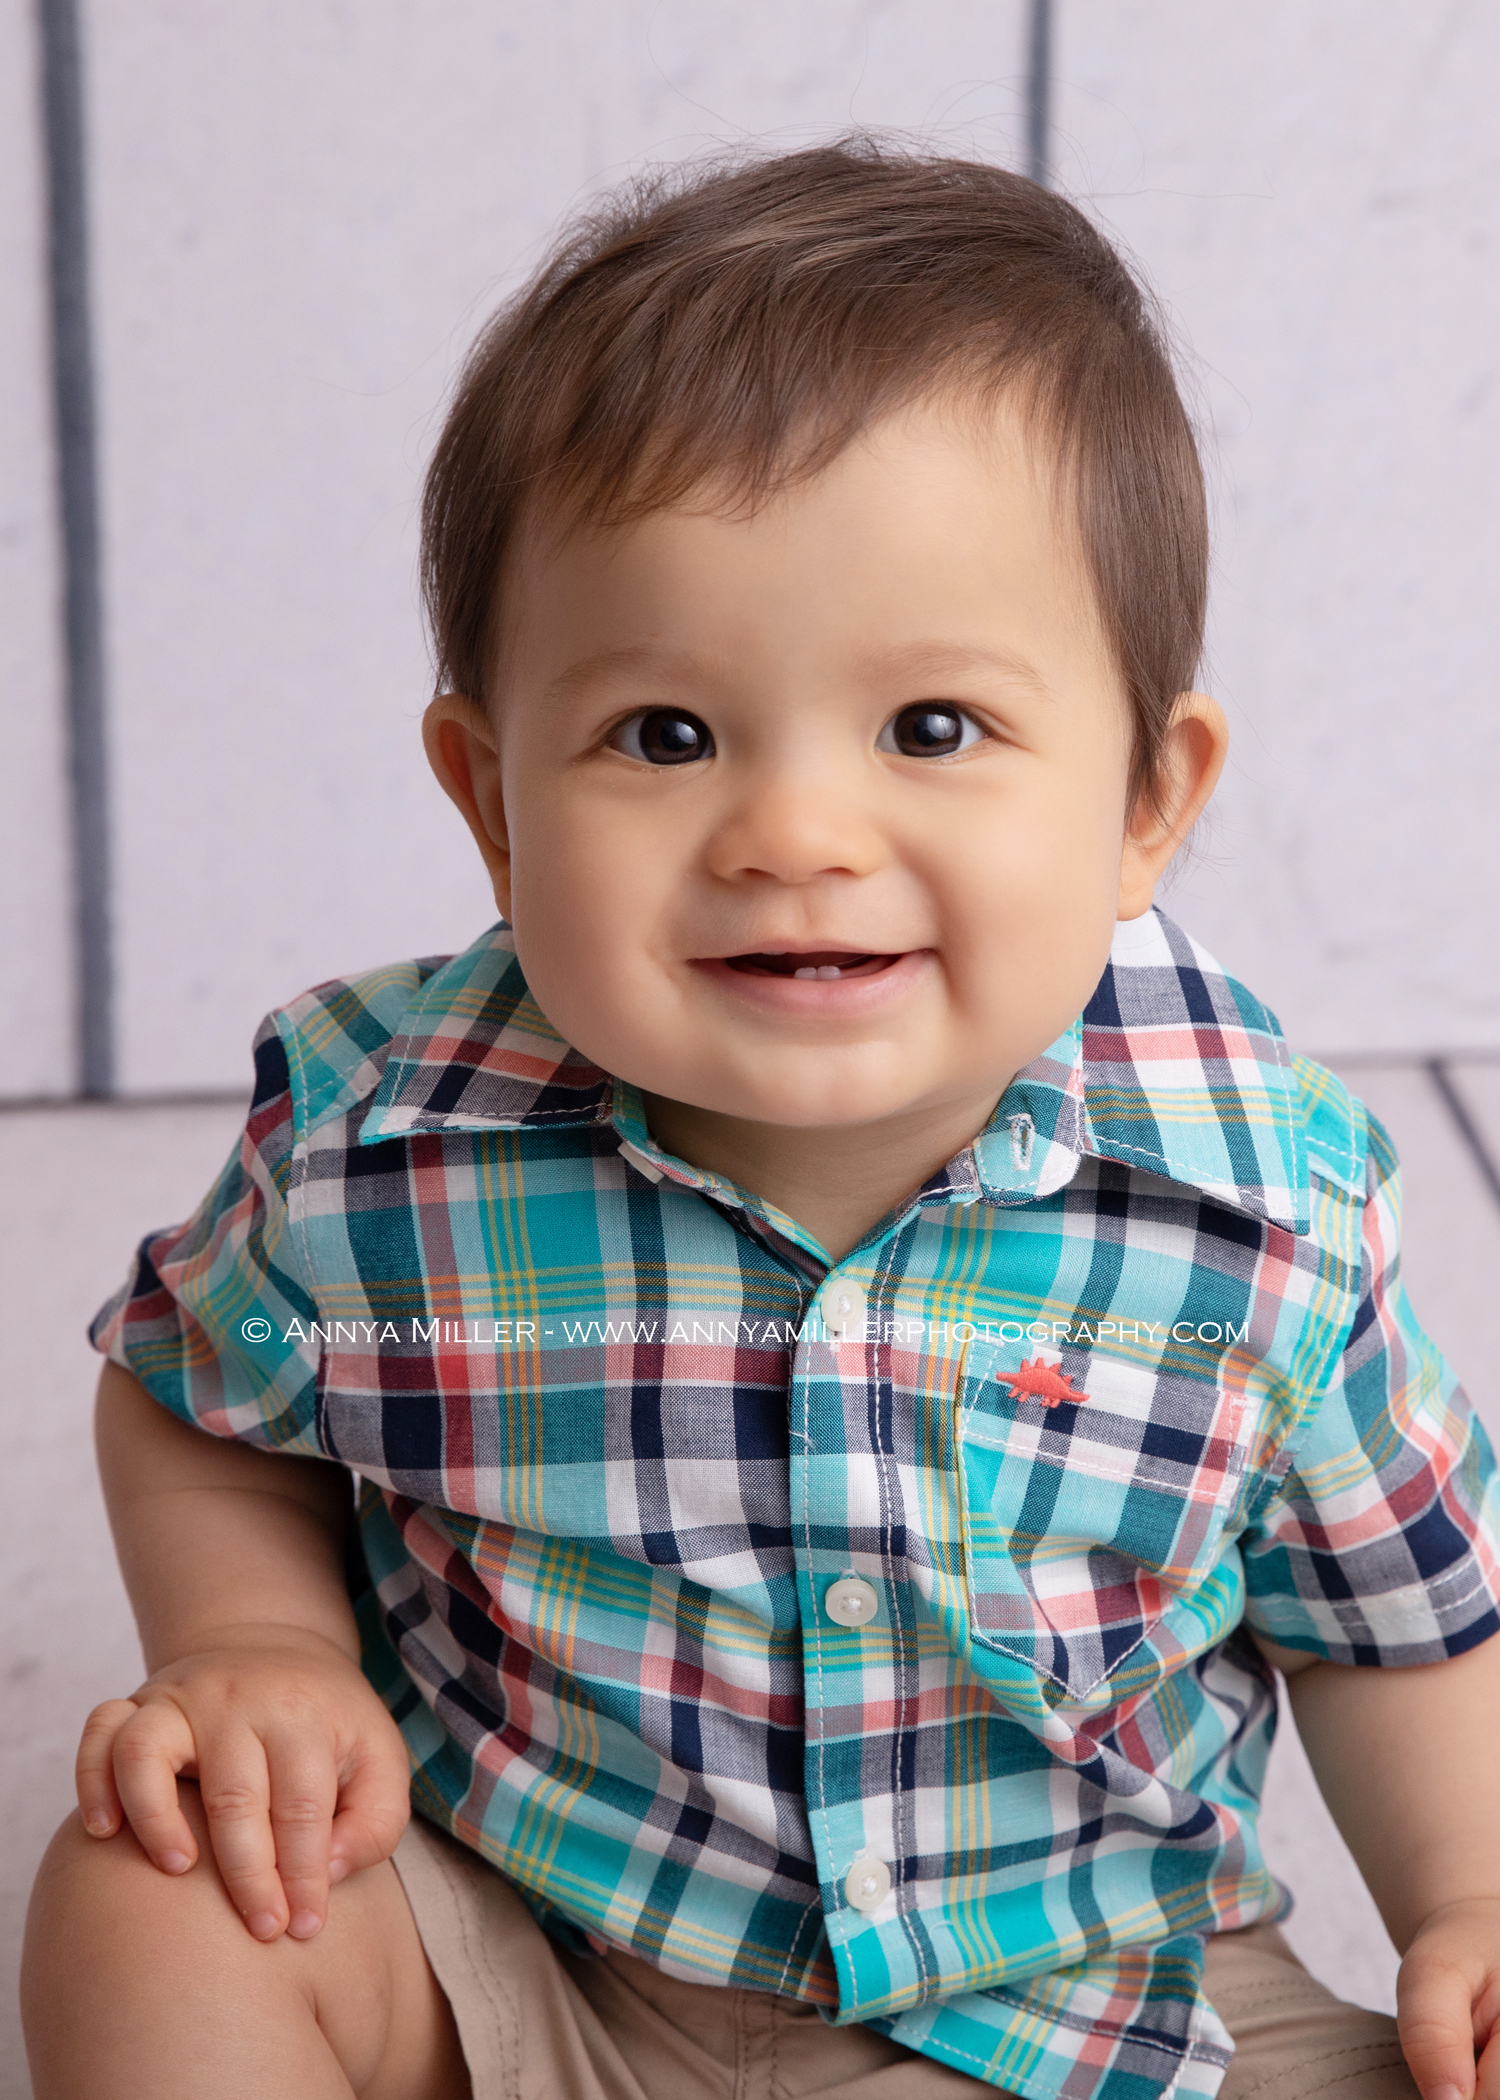 Portraits of baby boy by GTA baby photographer Annya Miller